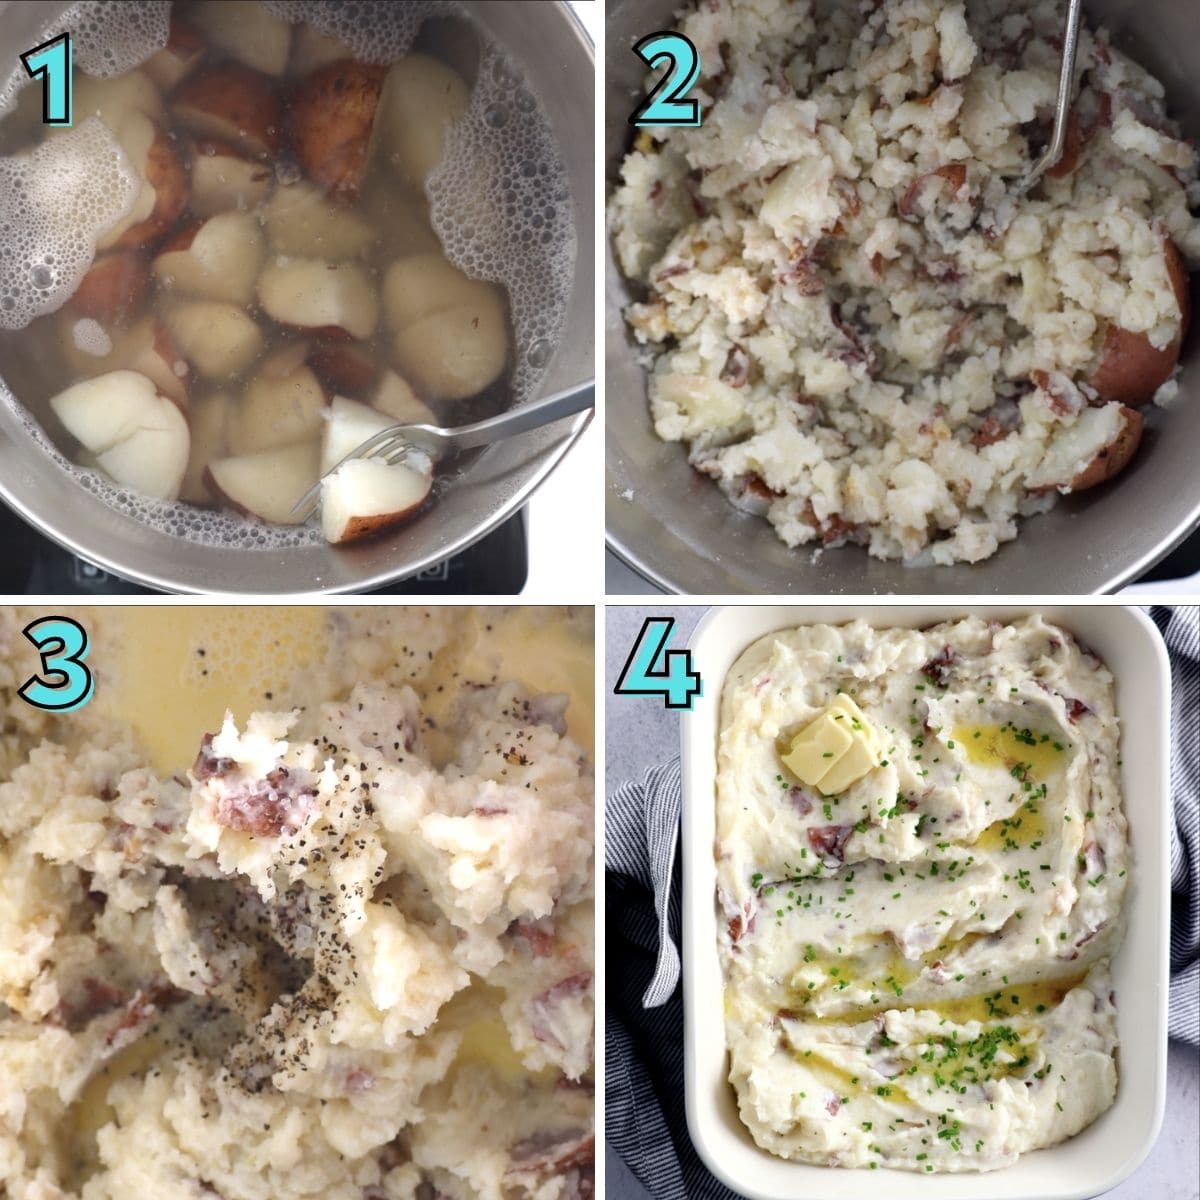 Step by step instructions to prepare red skin mashed potatoes